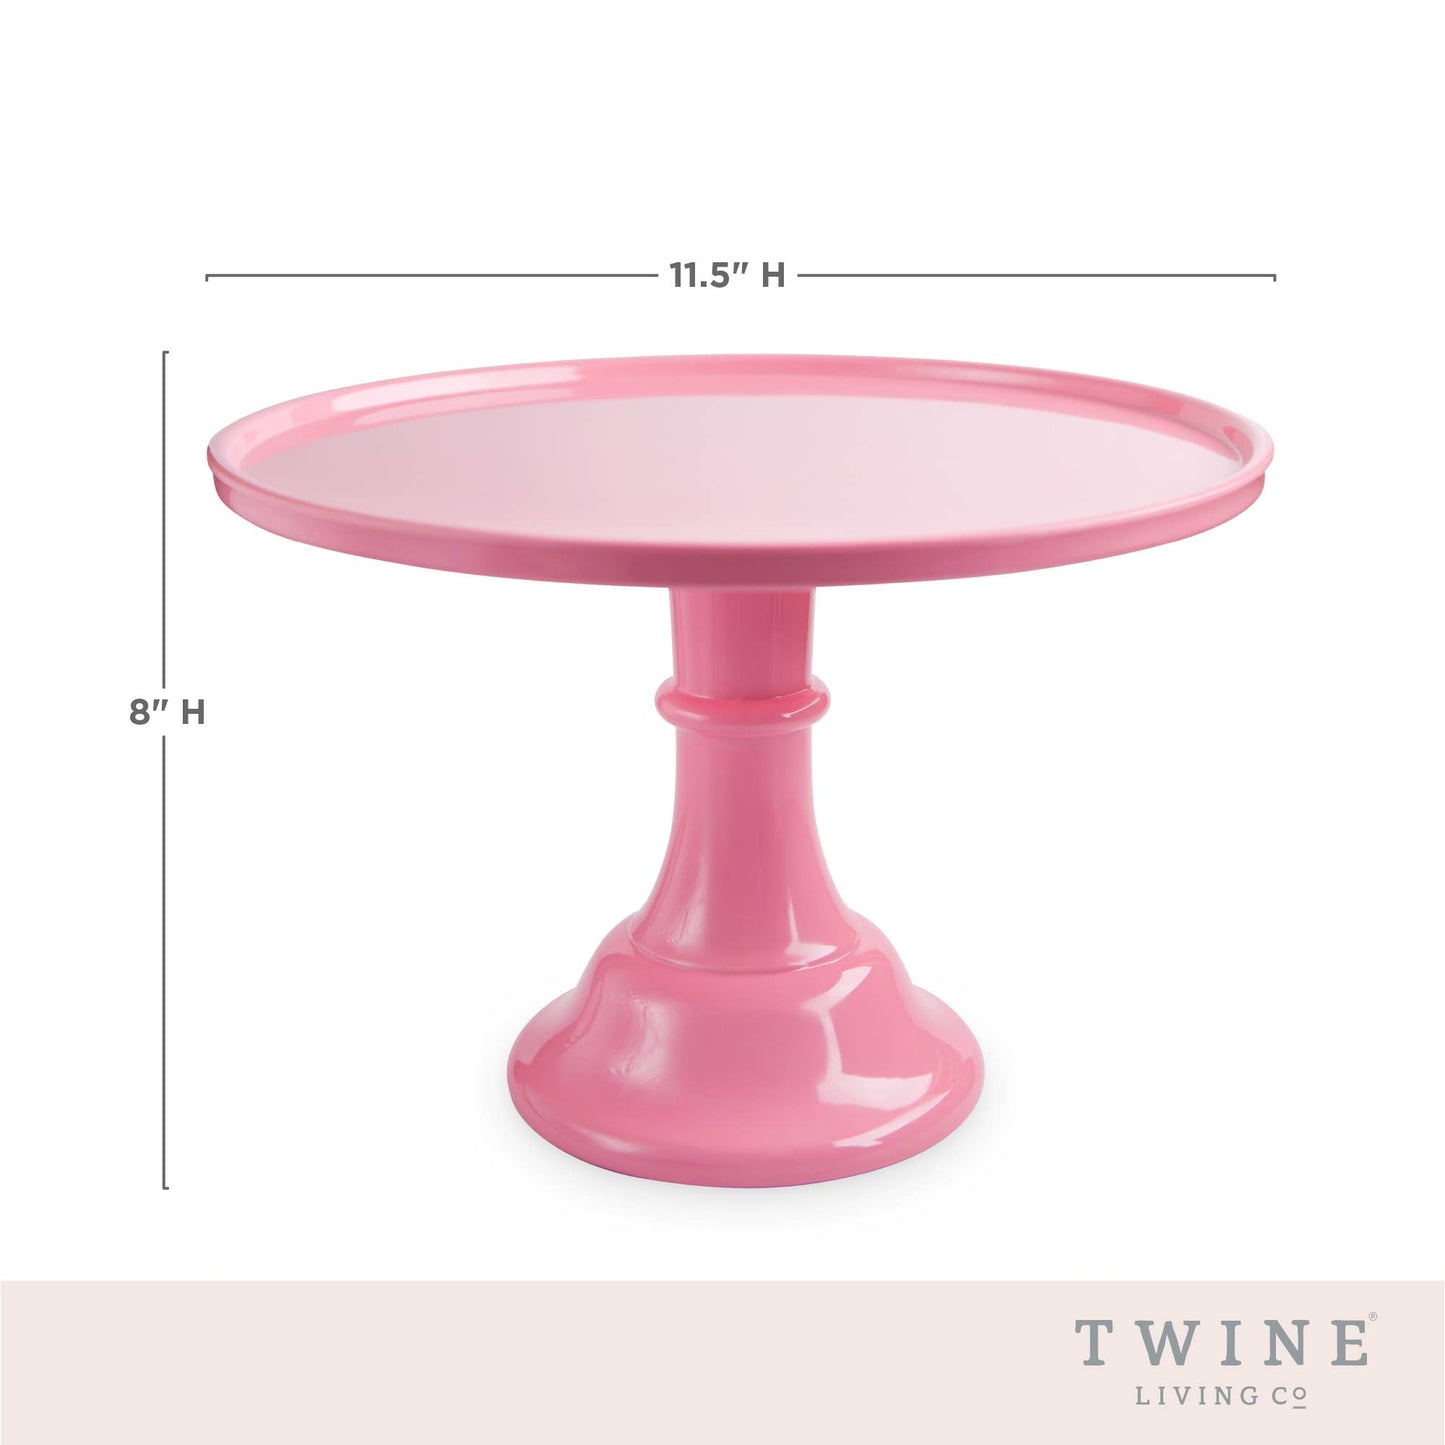 11.5" Collapsable Melamine Cake Stand - Pink